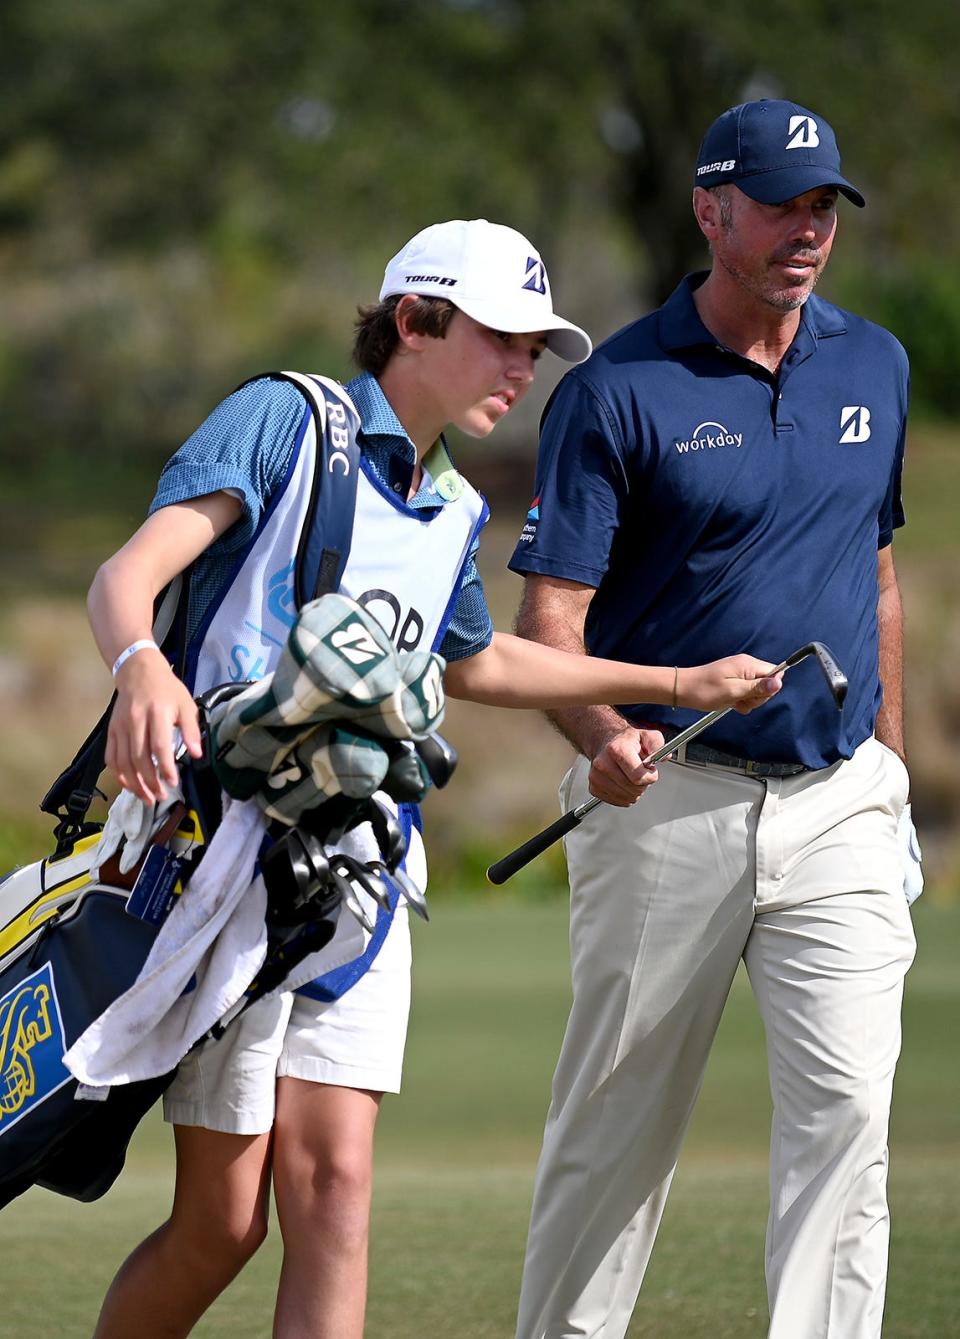 Matt Kuchar's son Cameron has caddied for his father in tournaments, such as the QBE Shootout, and last summer qualified for a U.S. Open sectional. Kuchar's sons are both involved in junior tennis